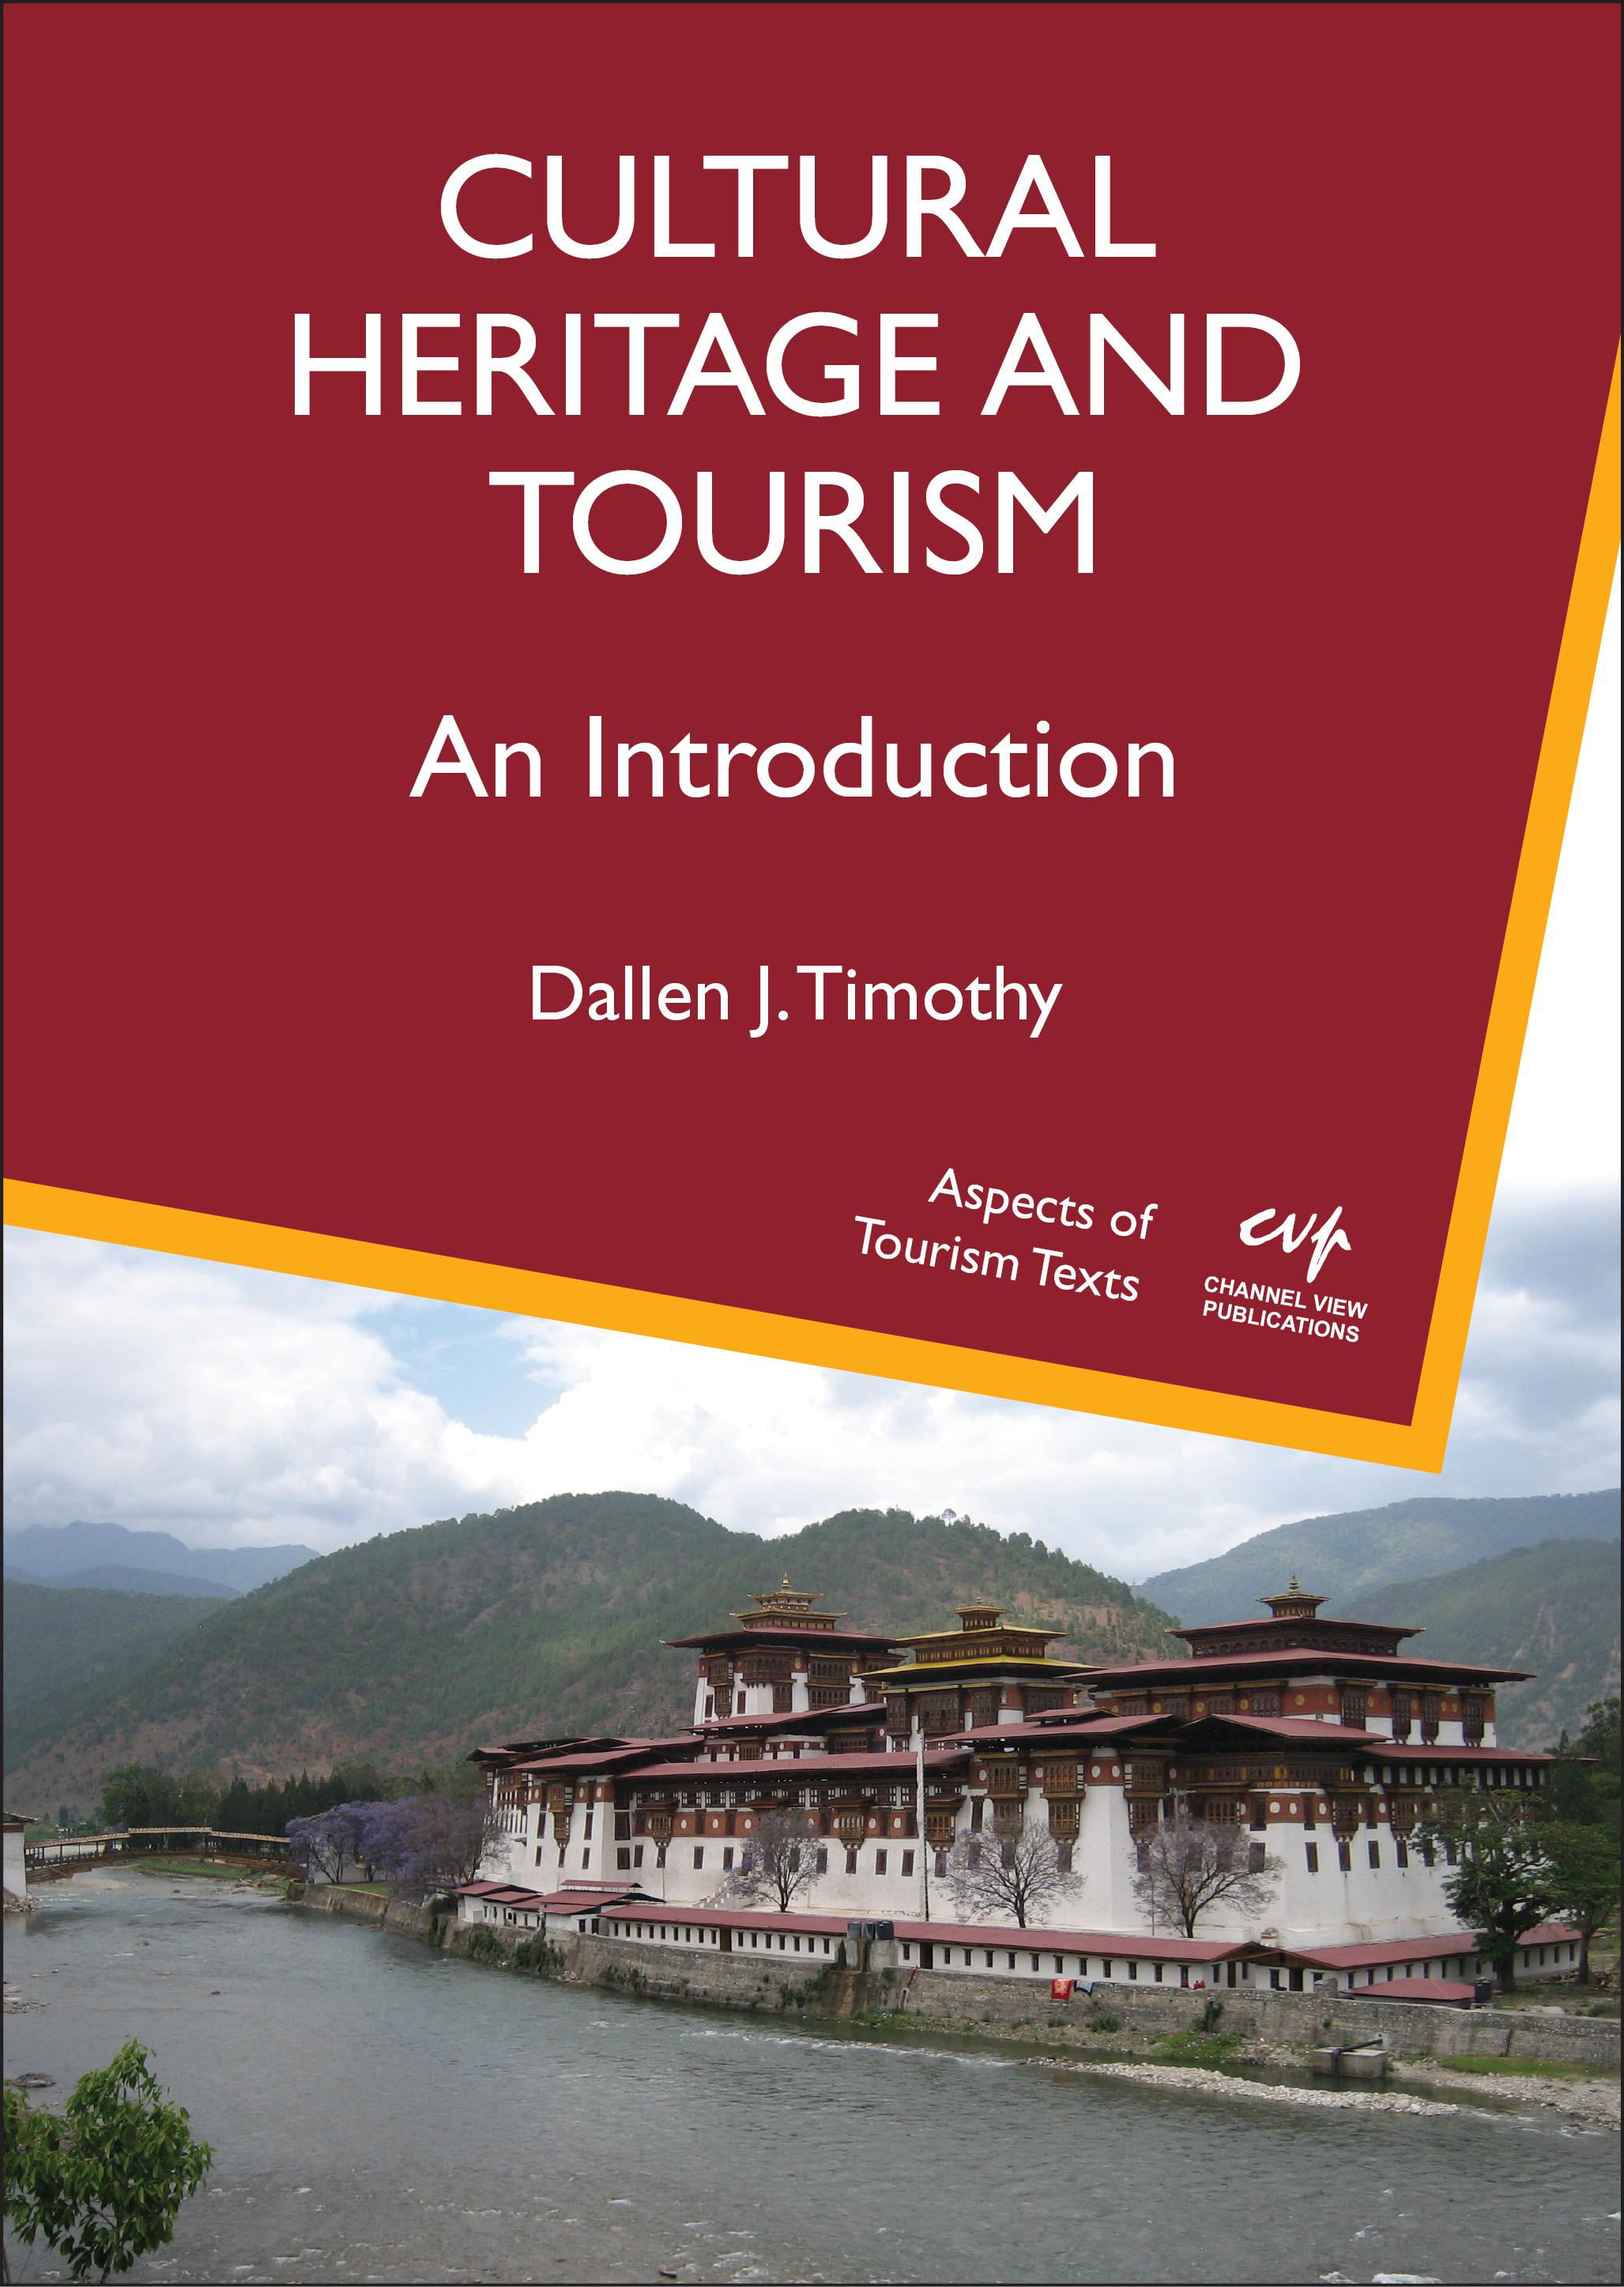 research paper on heritage and tourism